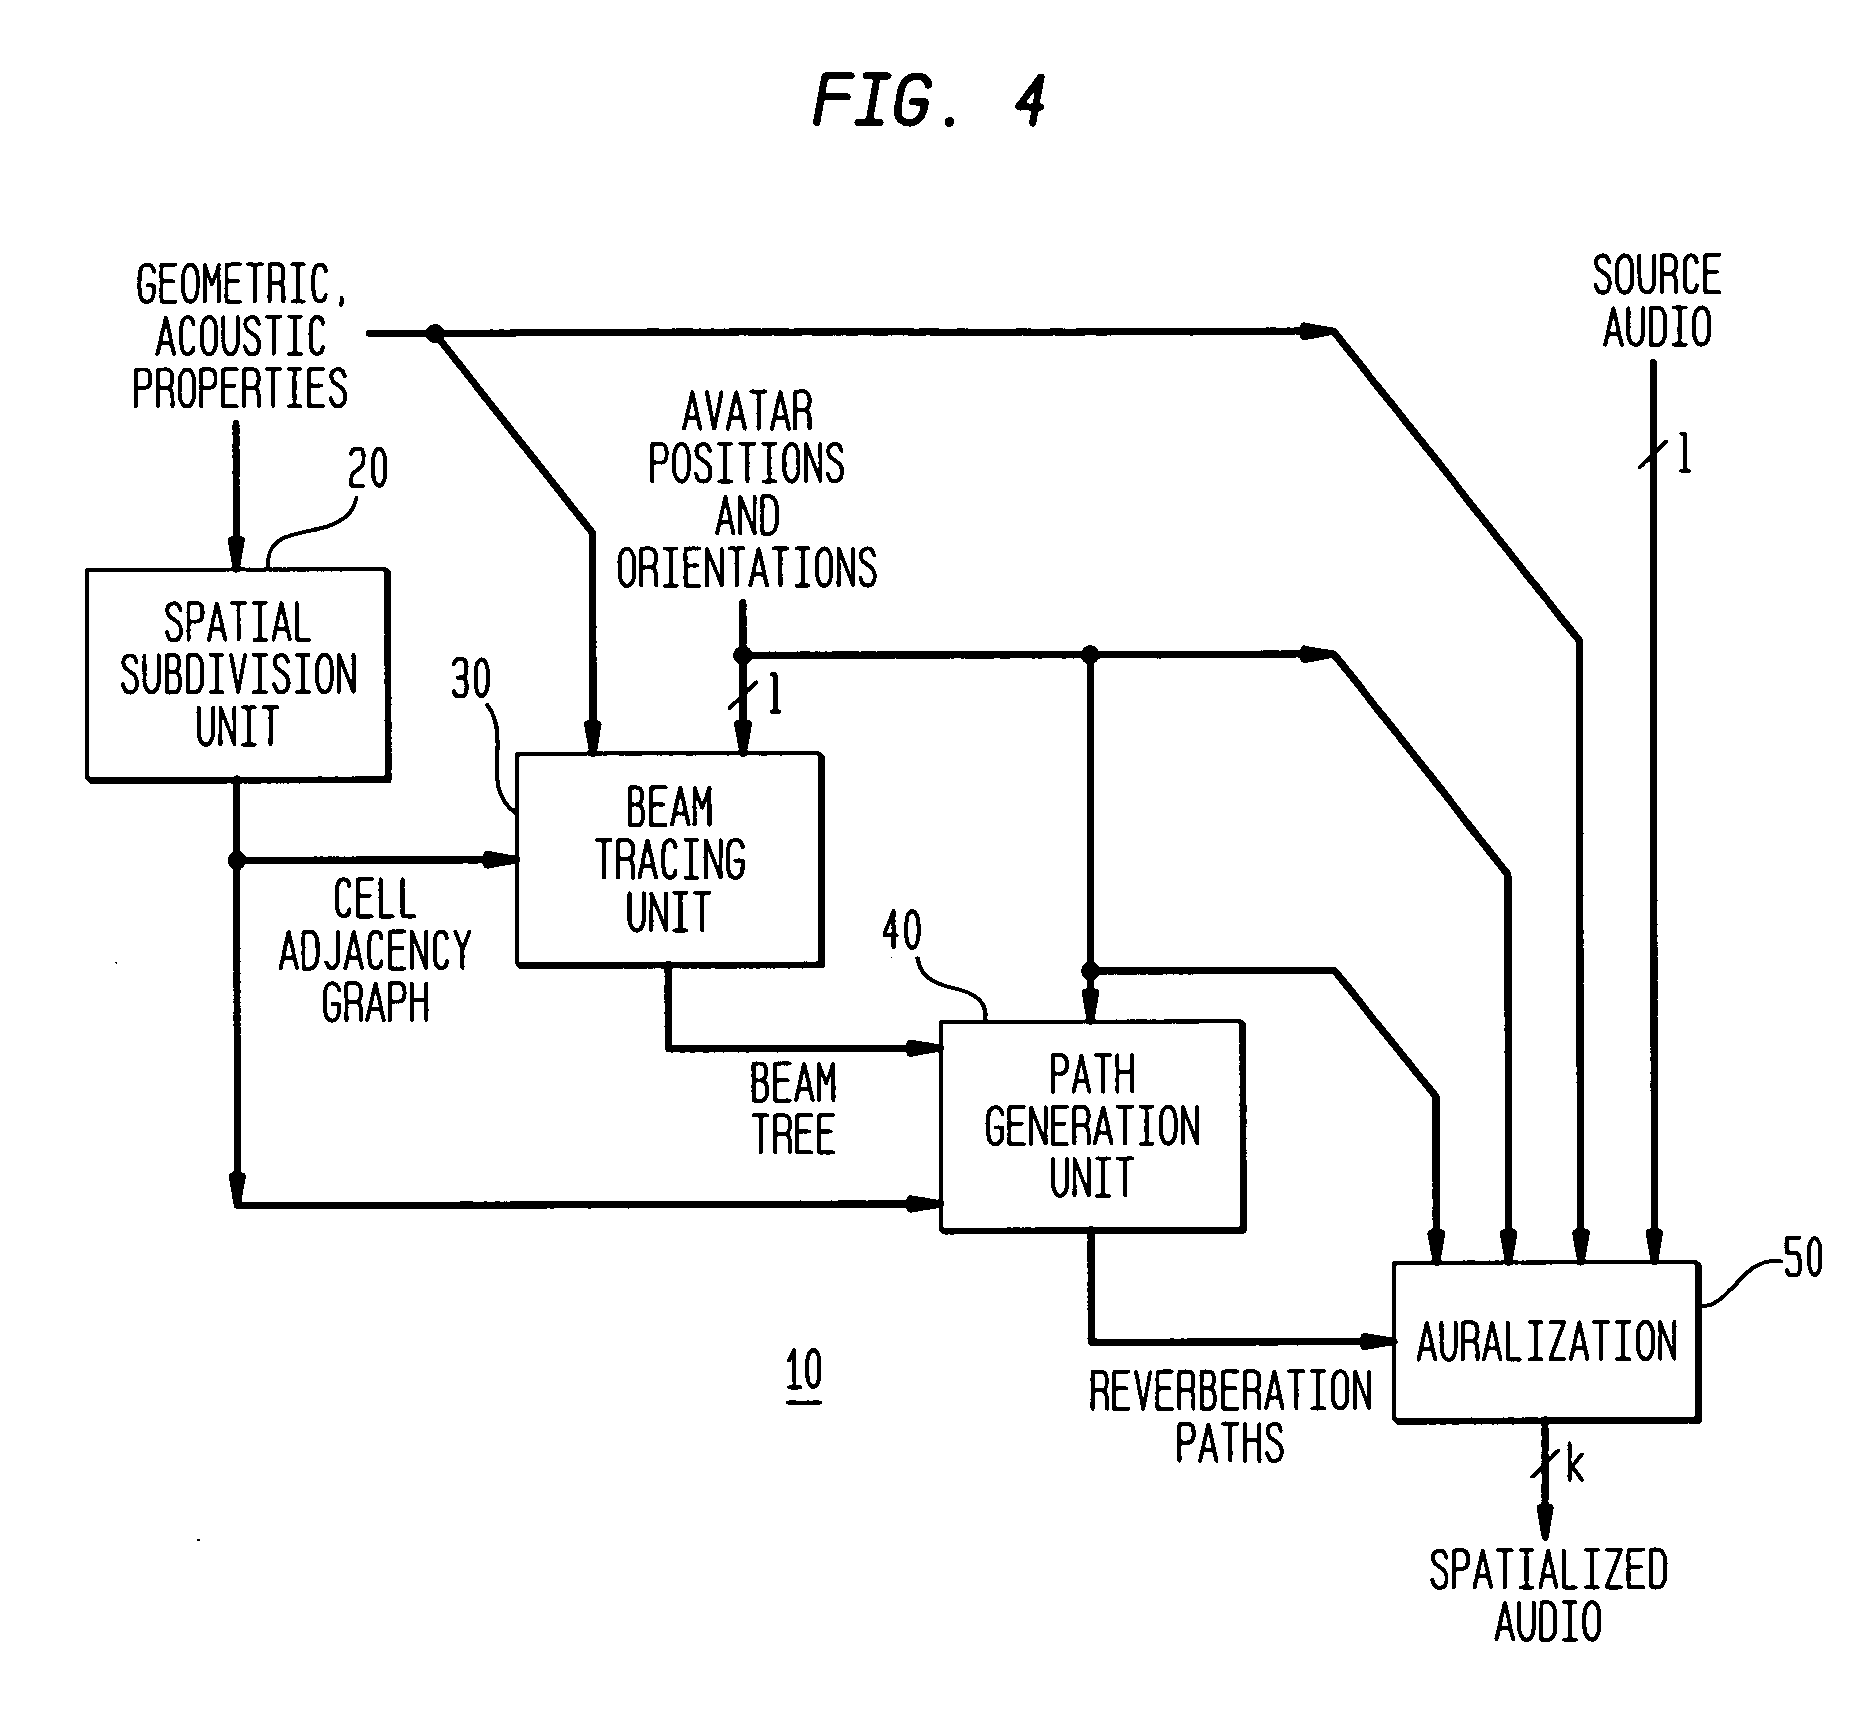 Acoustic modeling apparatus and method using accelerated beam tracing techniques